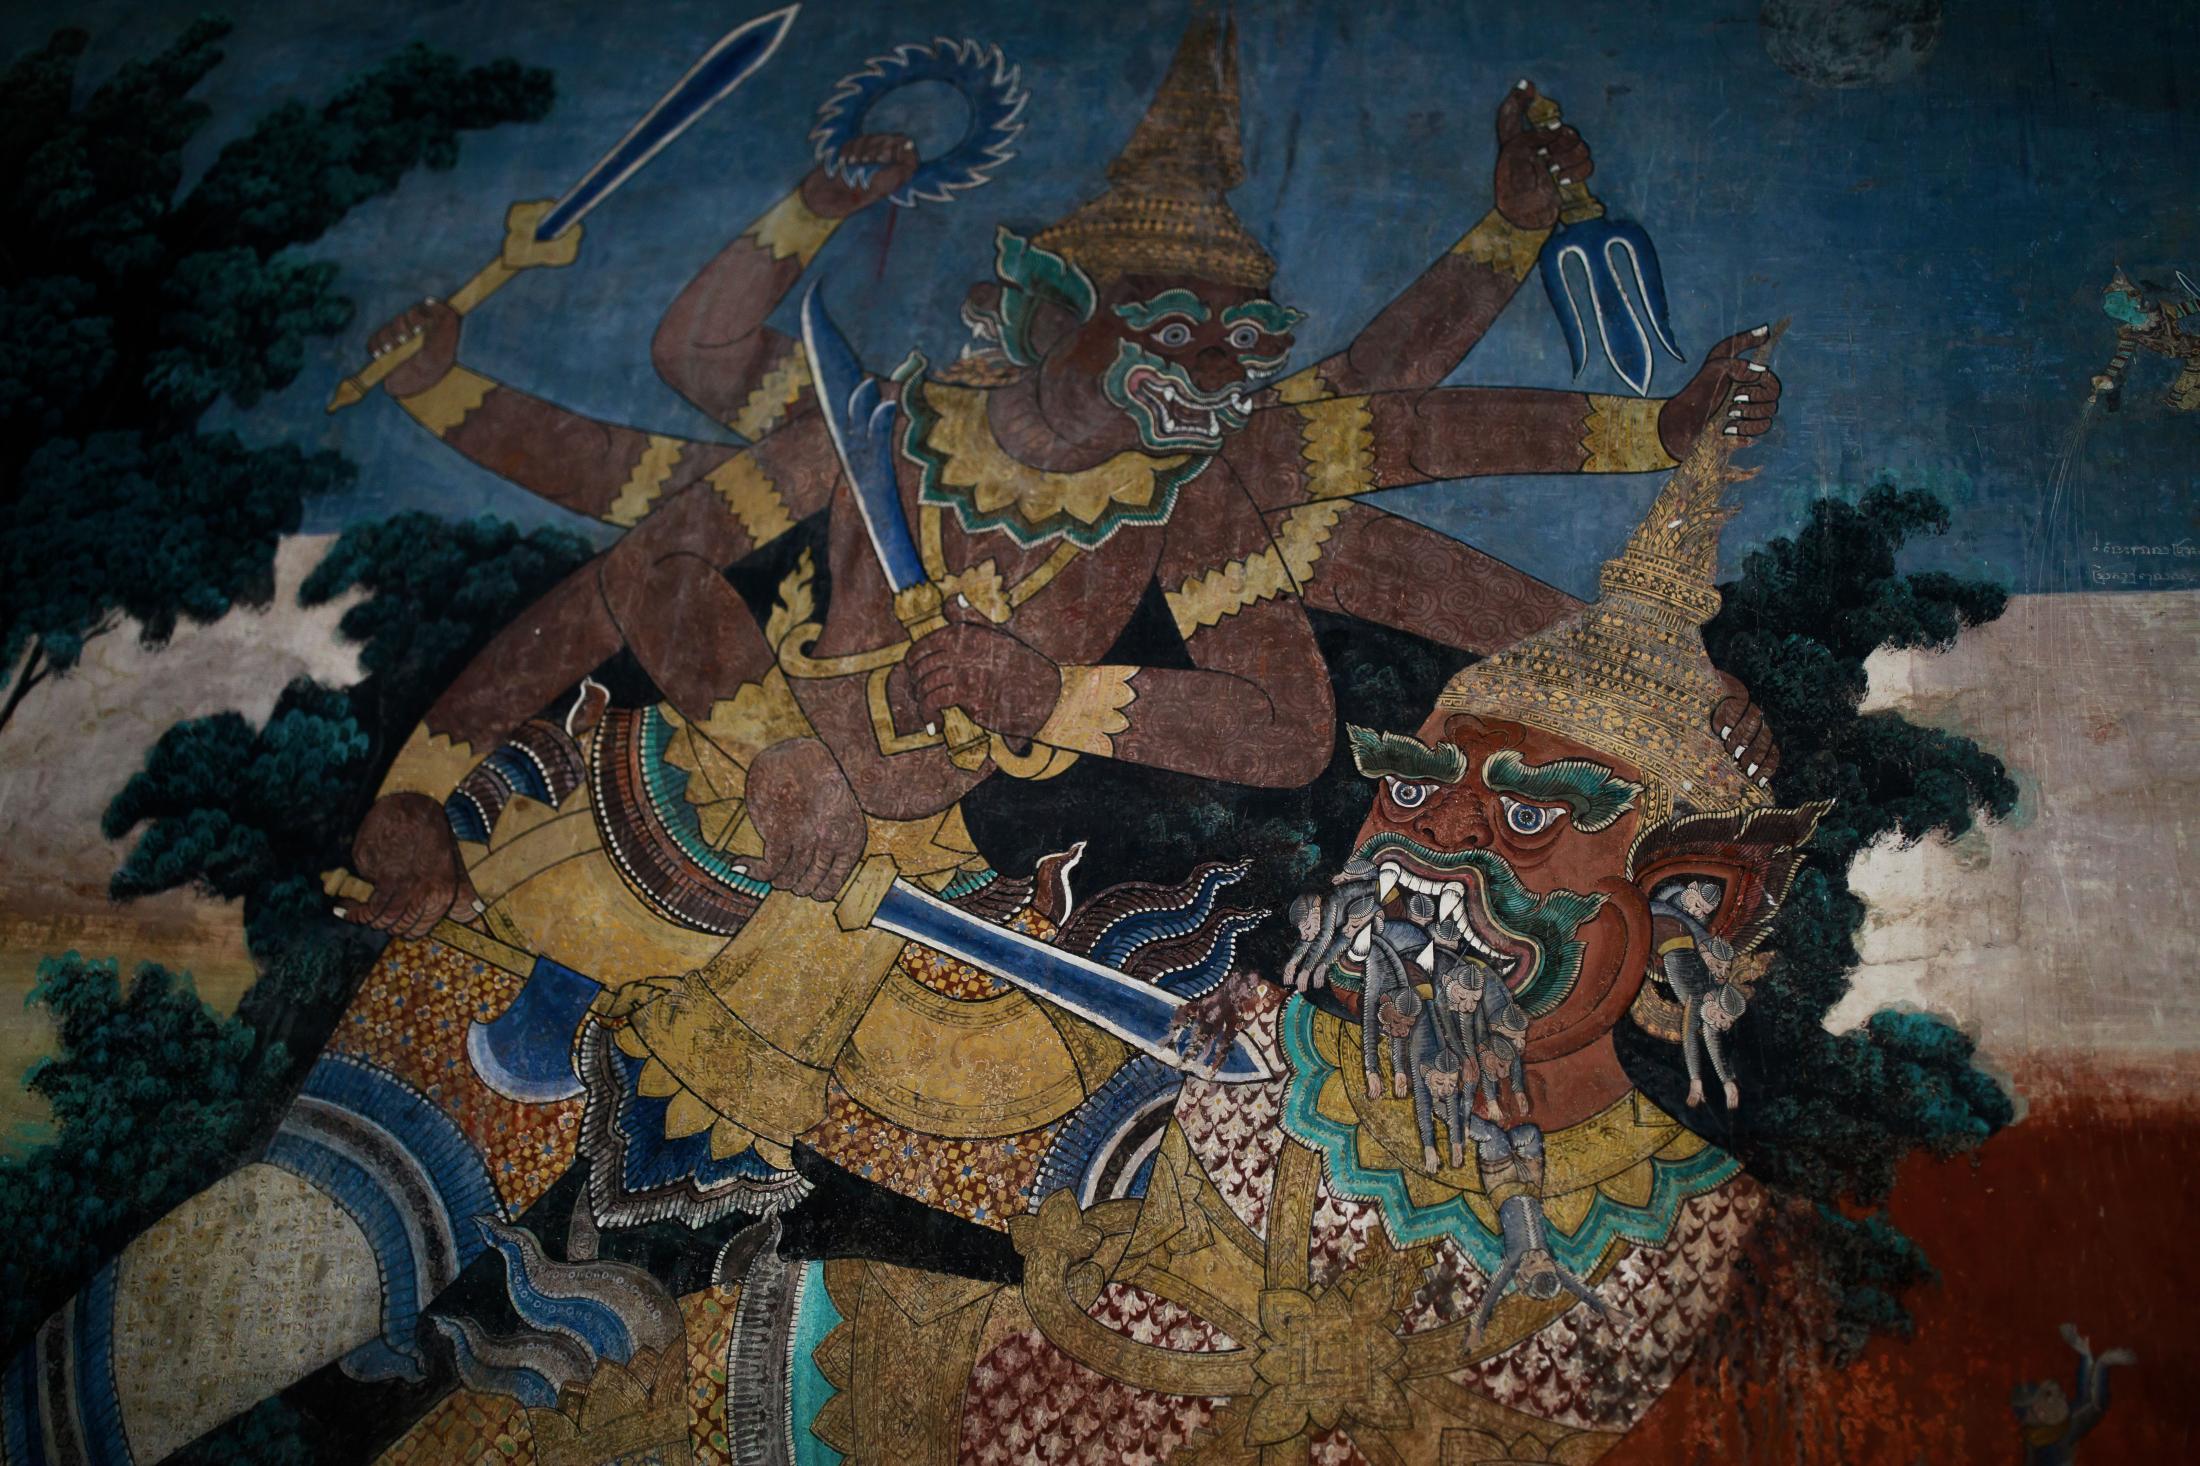  Reamker mural at the Royal Palace in Phnom Penh. This mural depicts different scenes from the fighting between Hanuman, the King of monkeys, and Indrajit, the first son of Kong Reap. The Reamker tale is the Khmer version of the ancient Ramayana tale. The mural was painted in 1903-1904. 